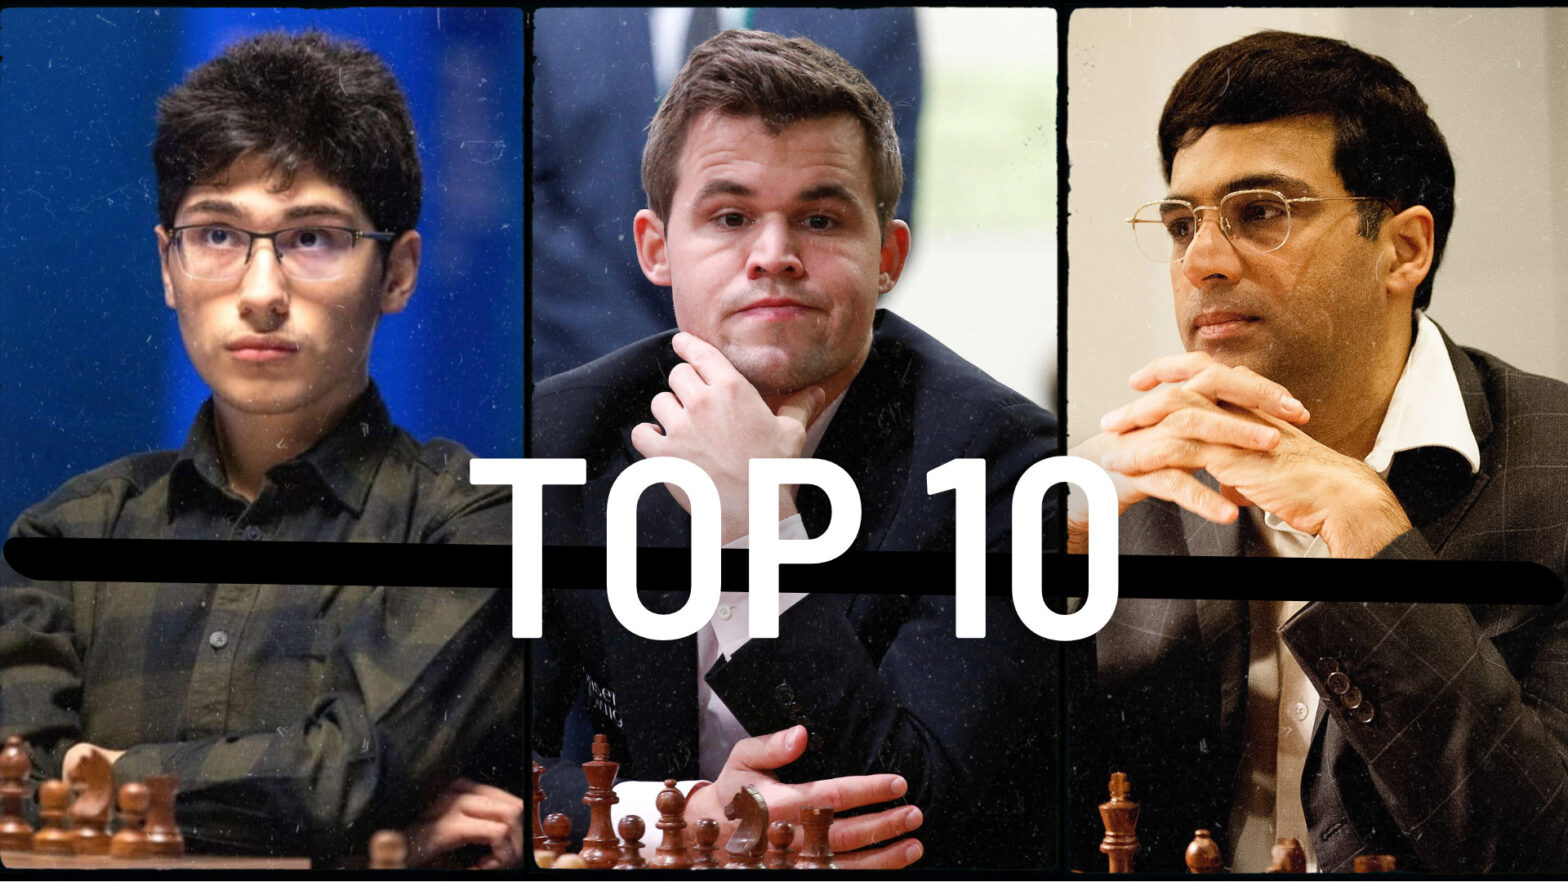 ▷ Chess world rankings: Know the top 10 best strong players.